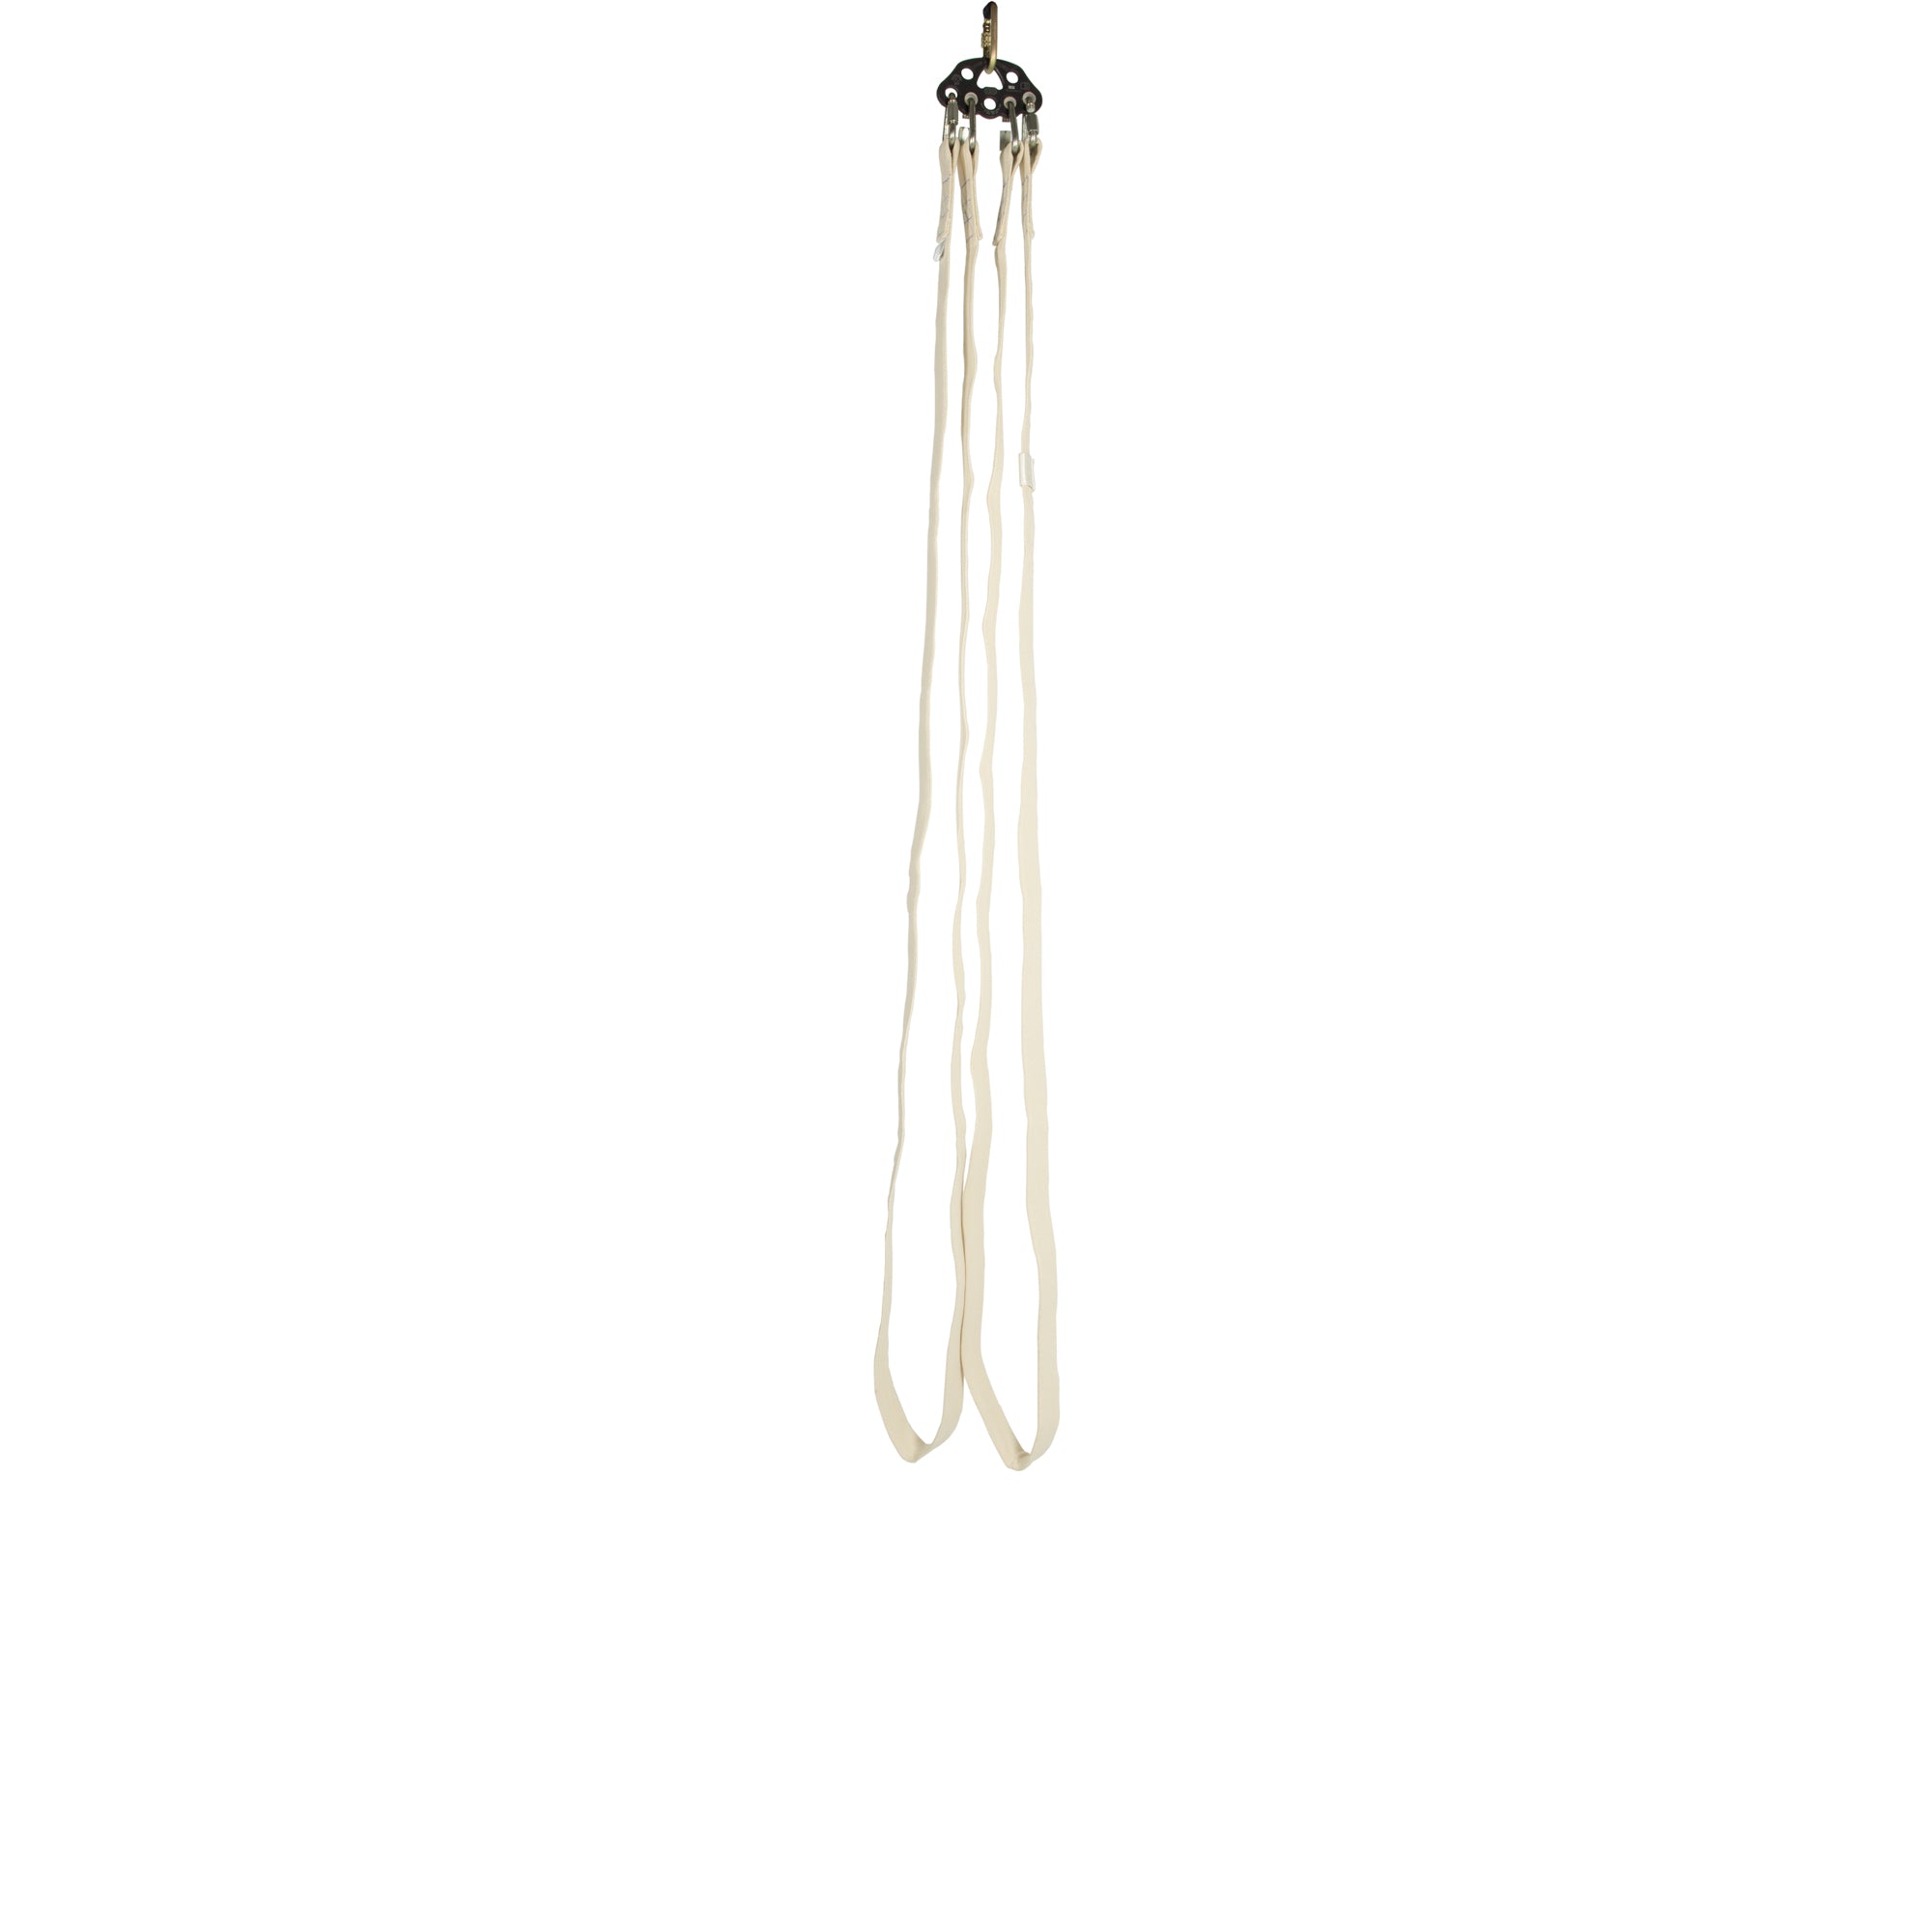 Prodigy cotton covered aerial loop 200cm rigged